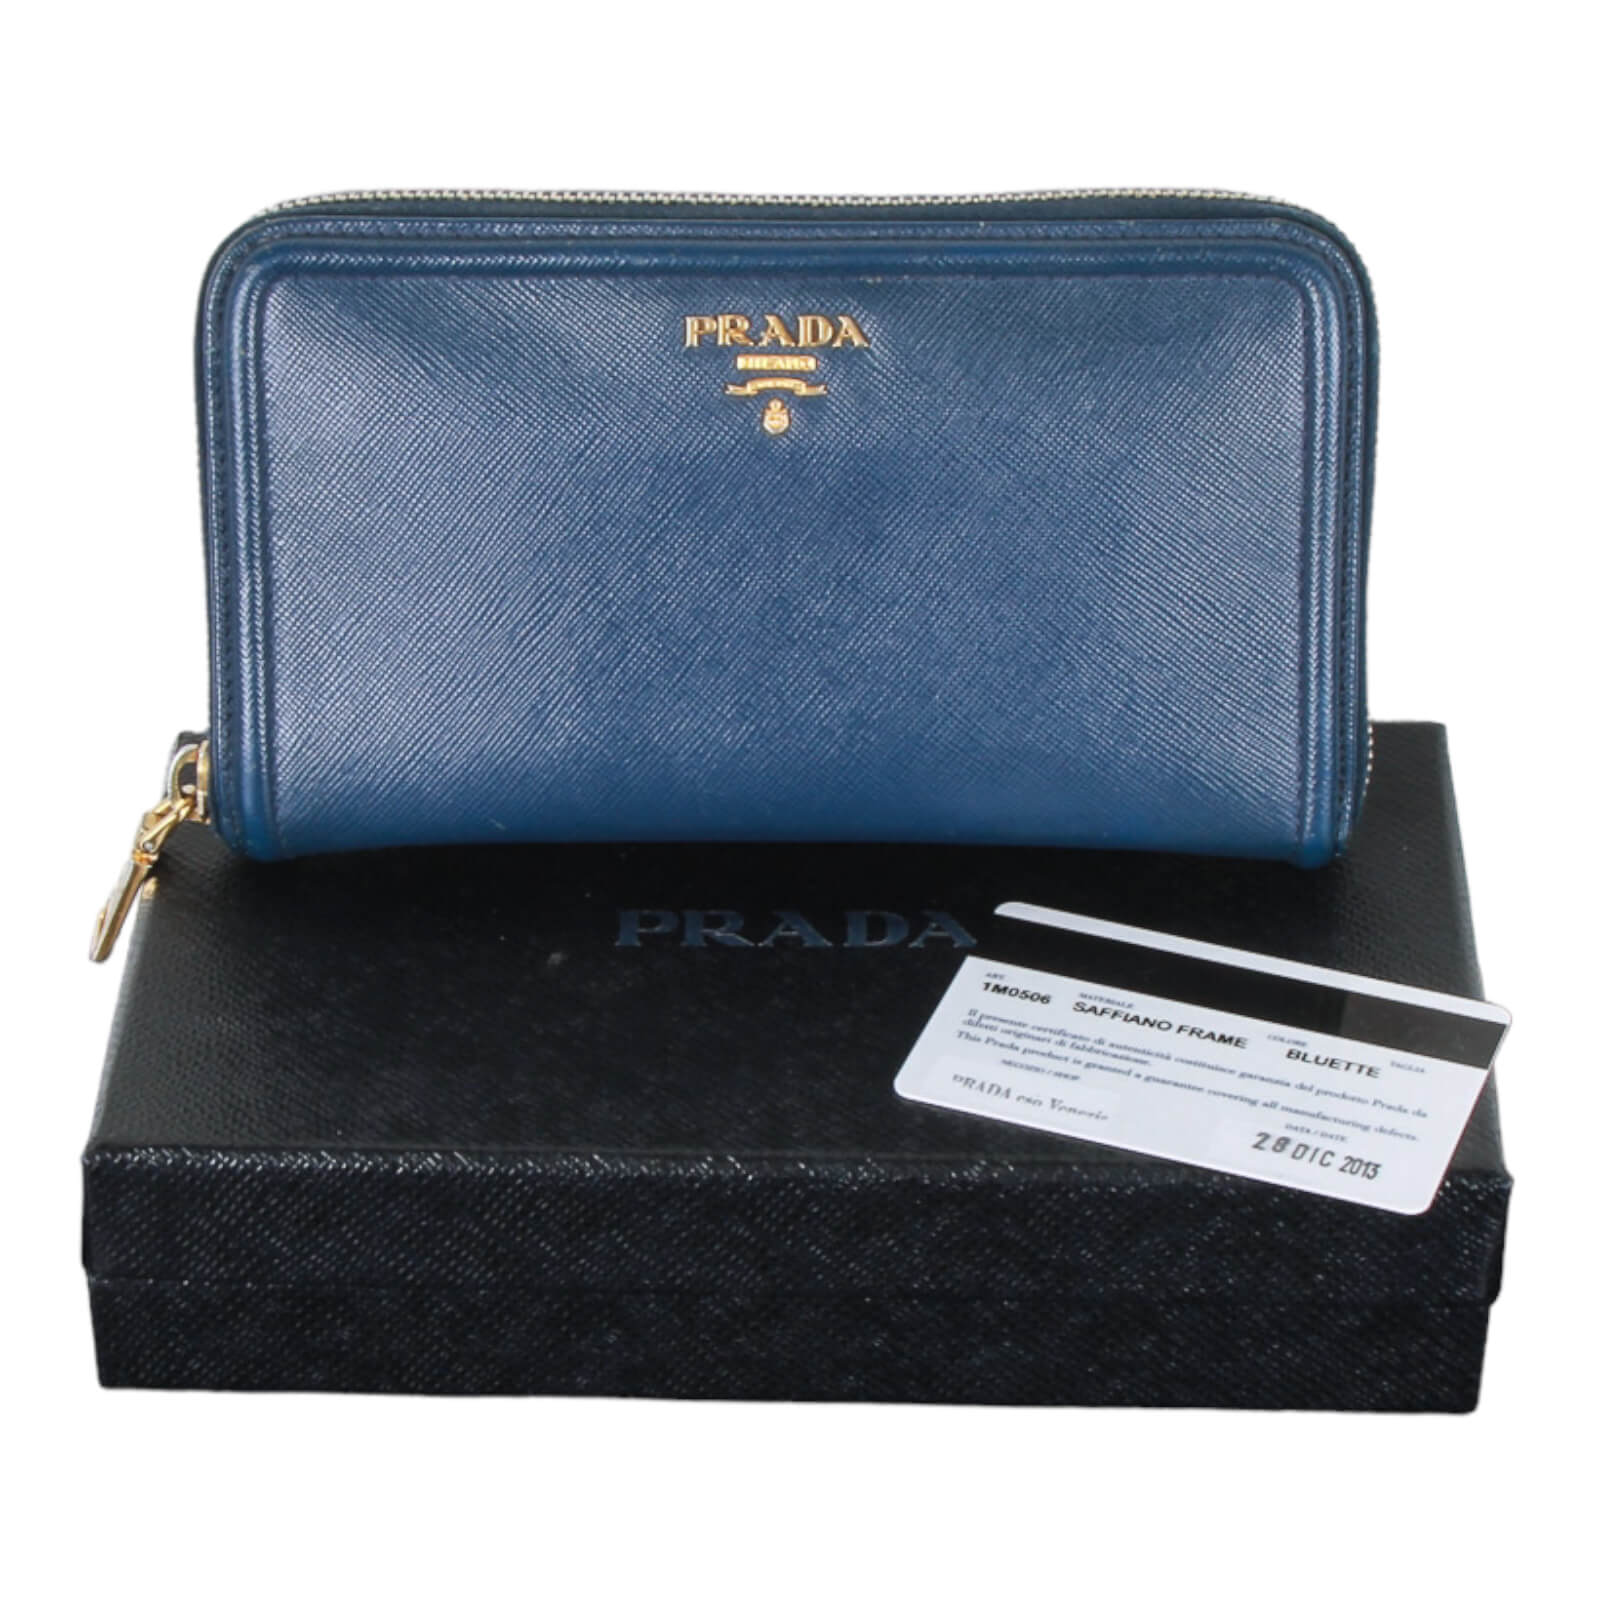 Prada Wallets - Authenticated Resale | The RealReal